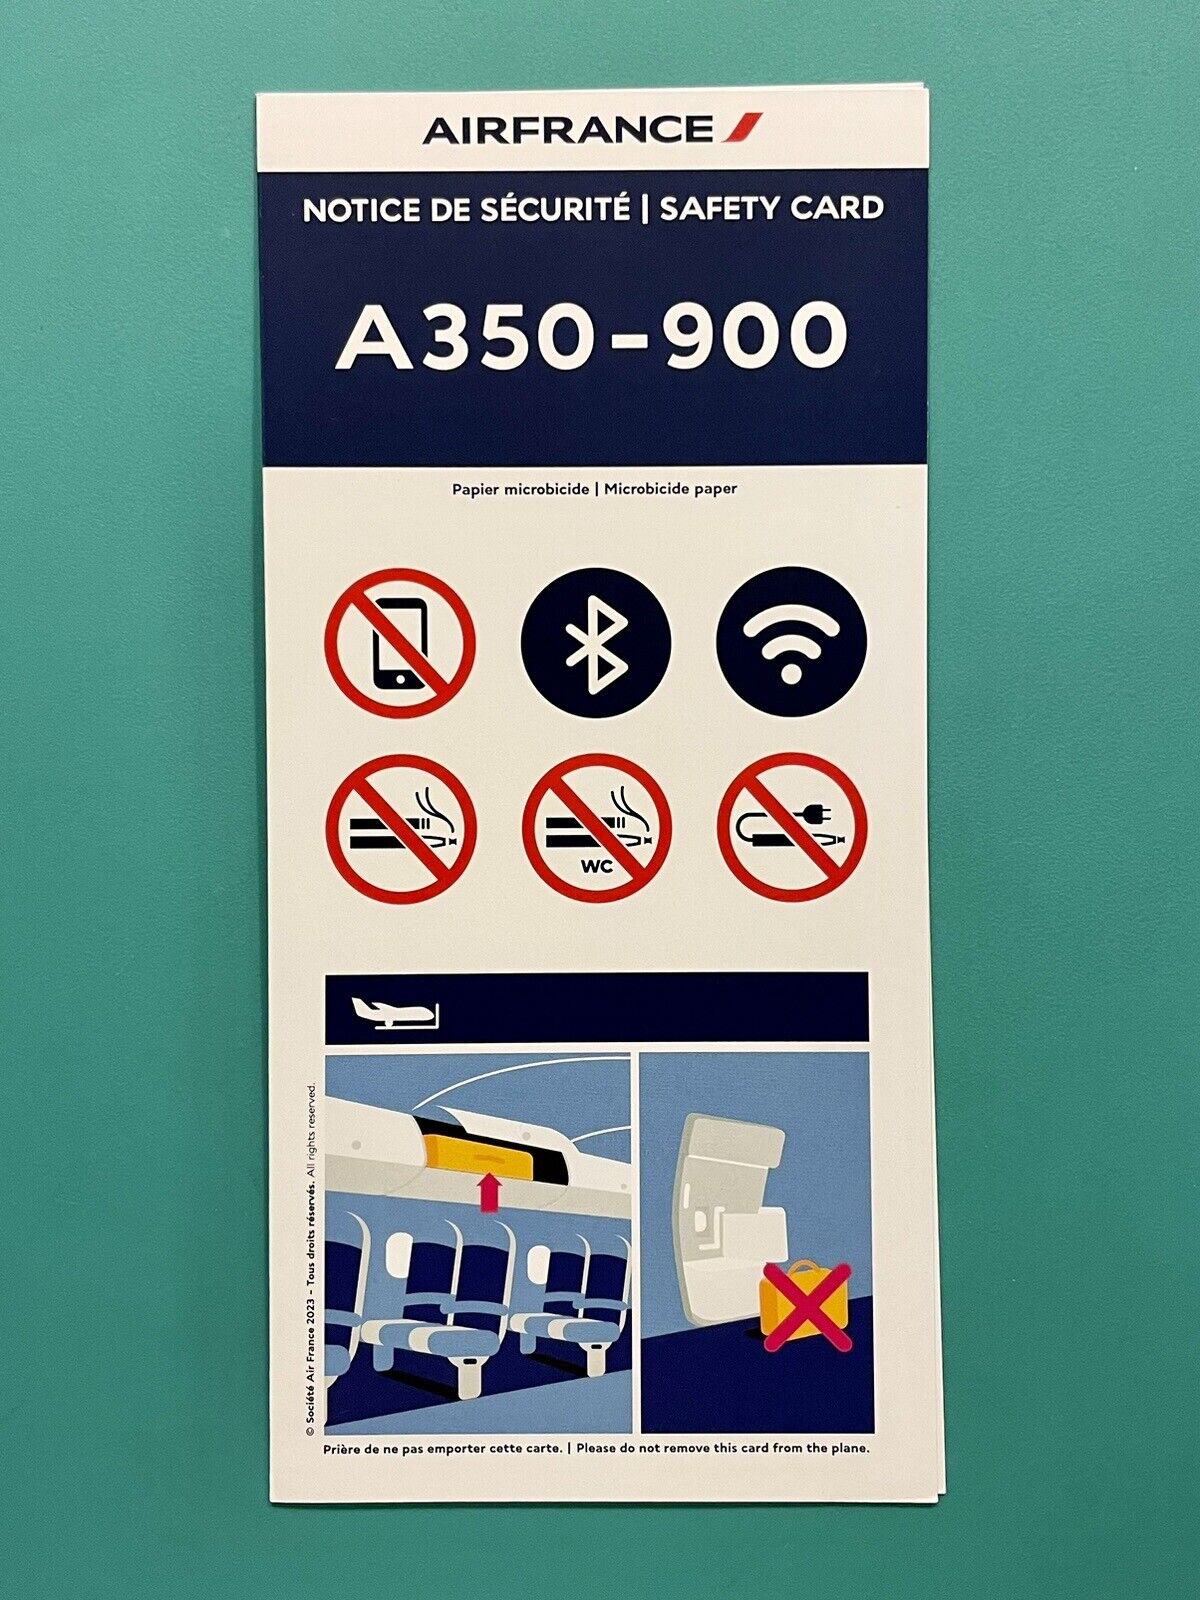 2023 AIR FRANCE SAFETY CARD — AIRBUS 350